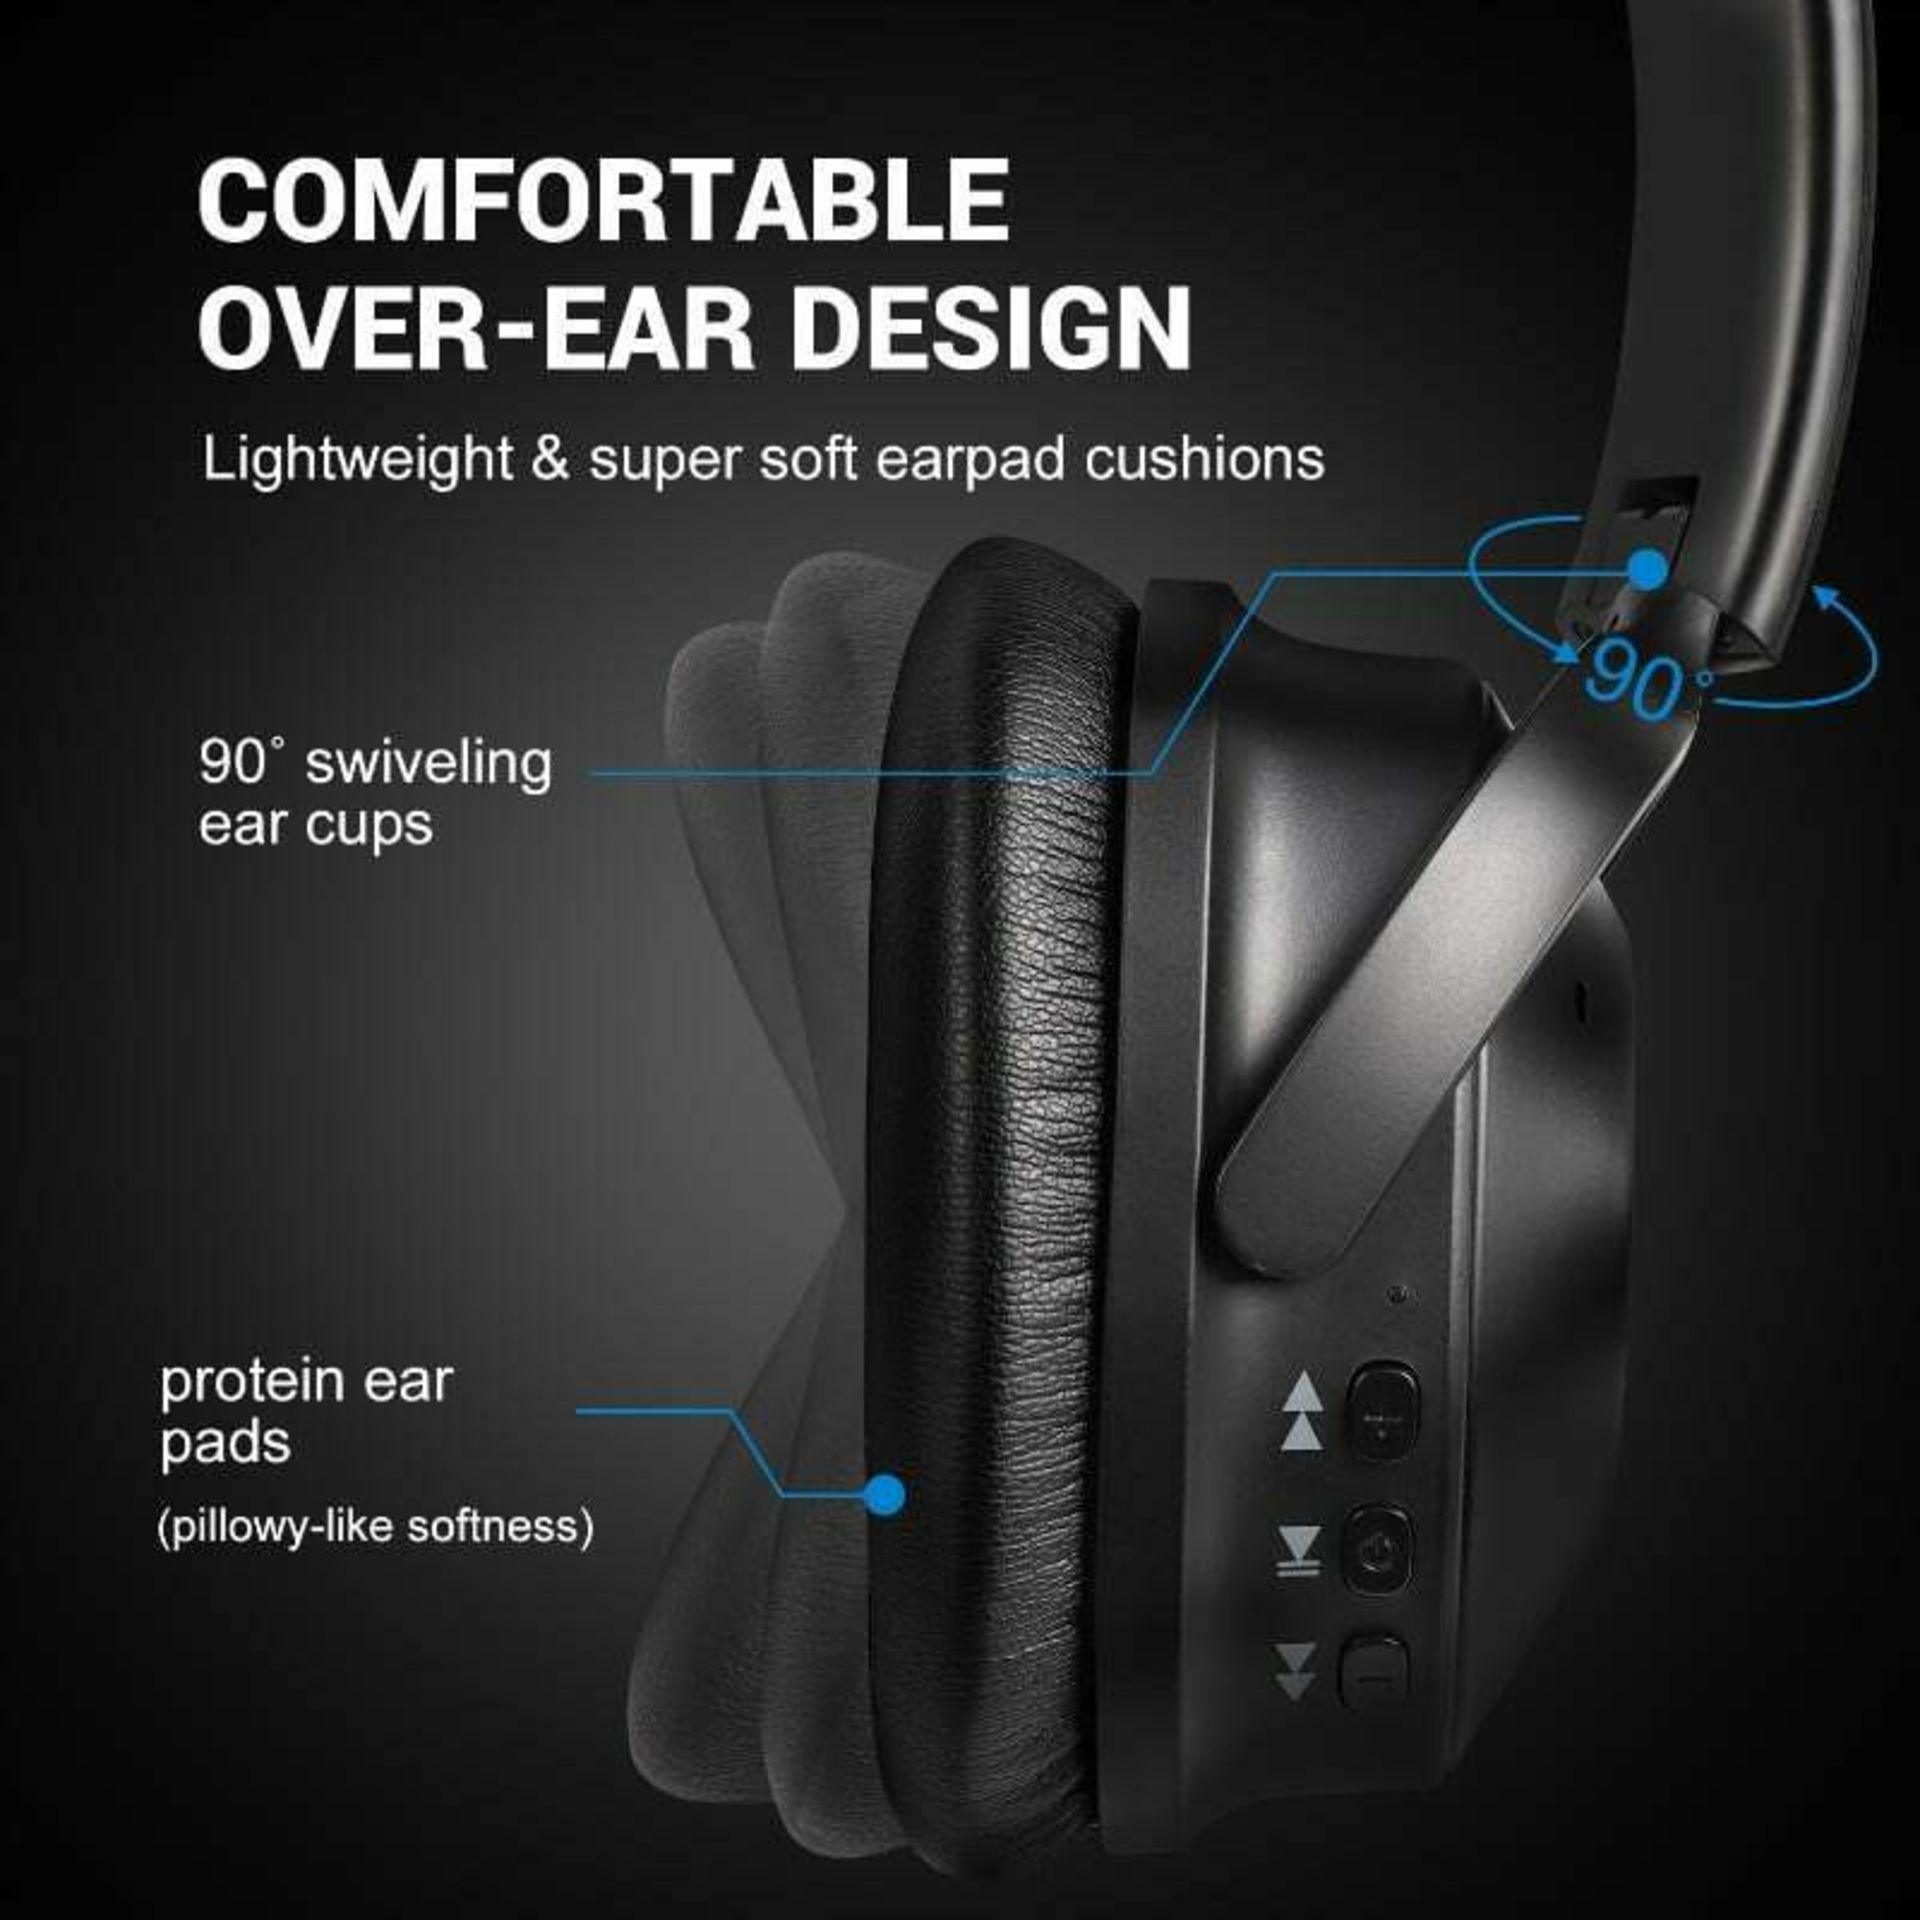 Oneaudio A9 Traveller ANC Bluetooth Headphones - Image 2 of 6